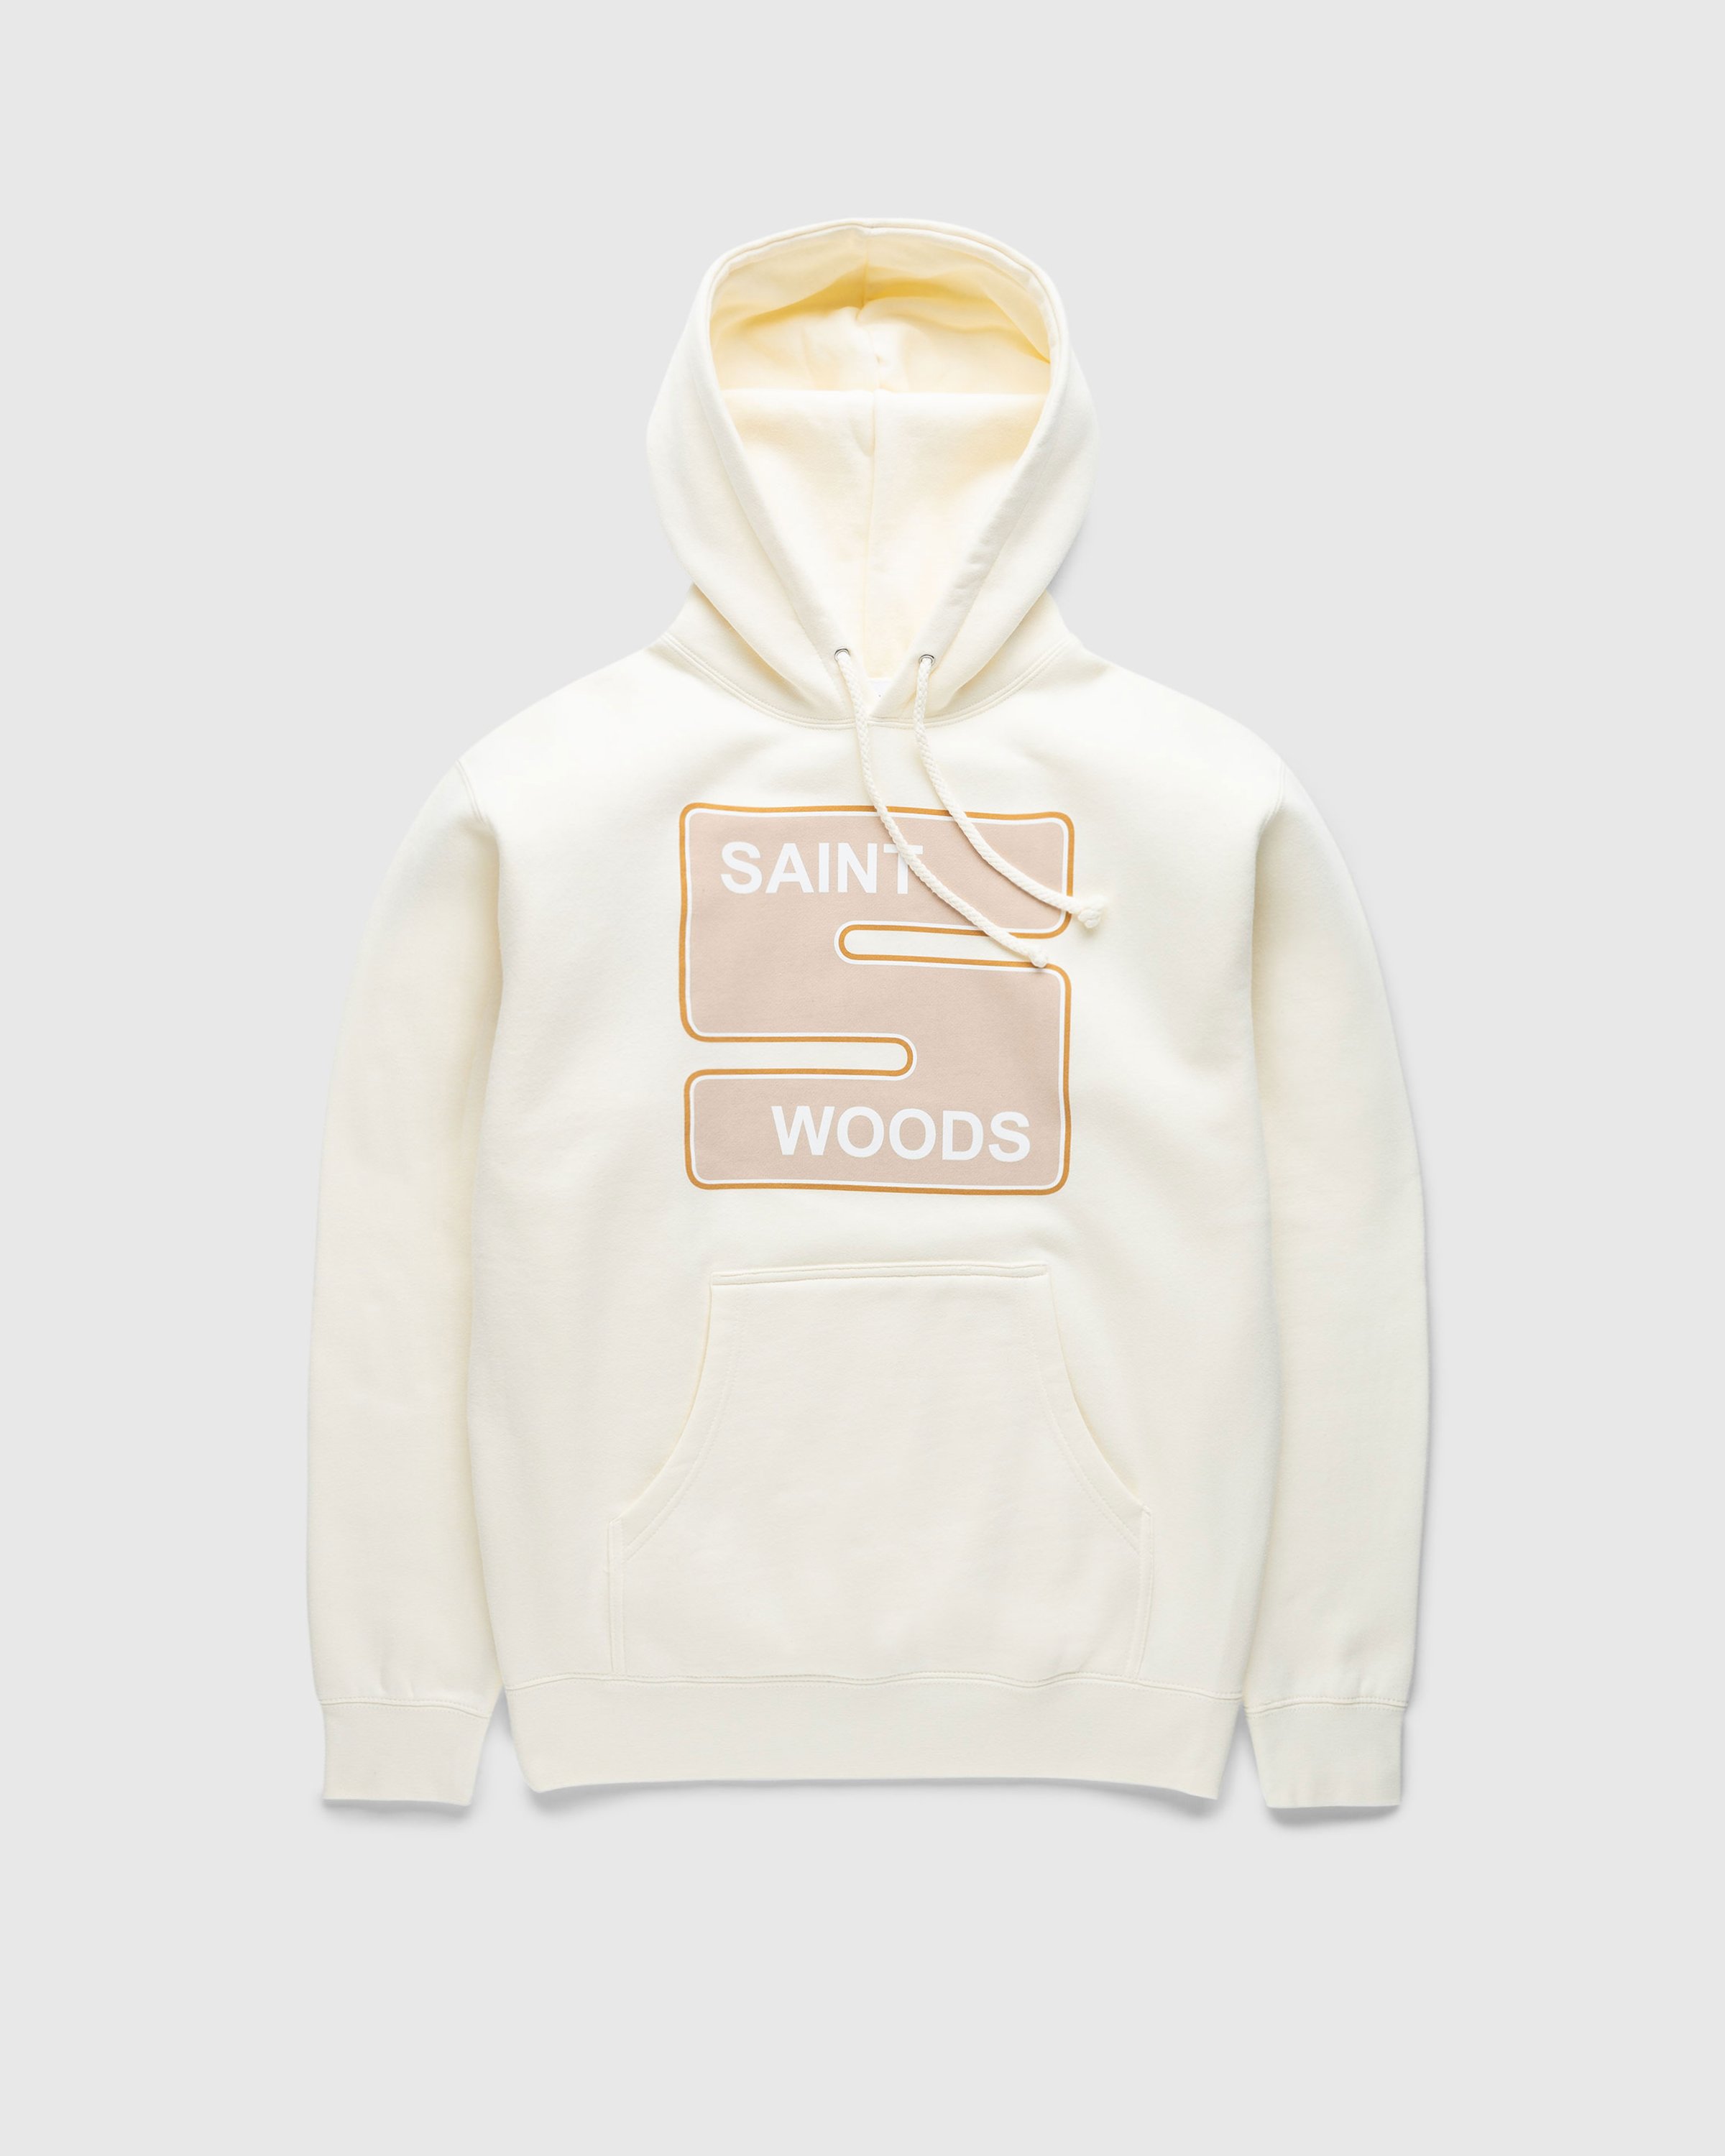 Saintwoods - You Go Hoodie Natural - Clothing - Beige - Image 1